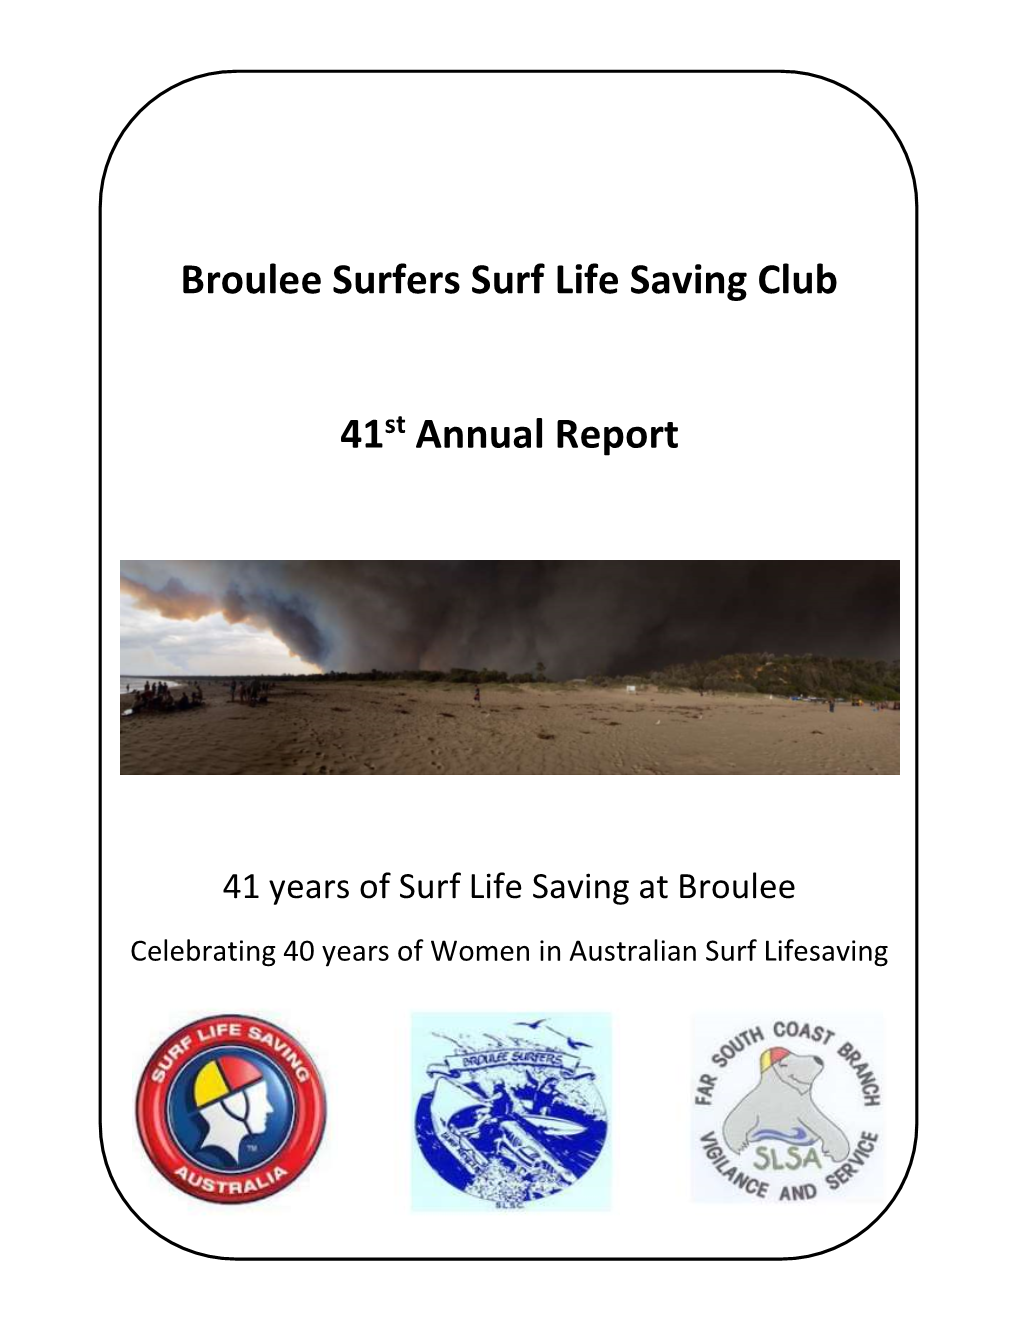 Broulee Surfers Surf Life Saving Club 41St Annual Report